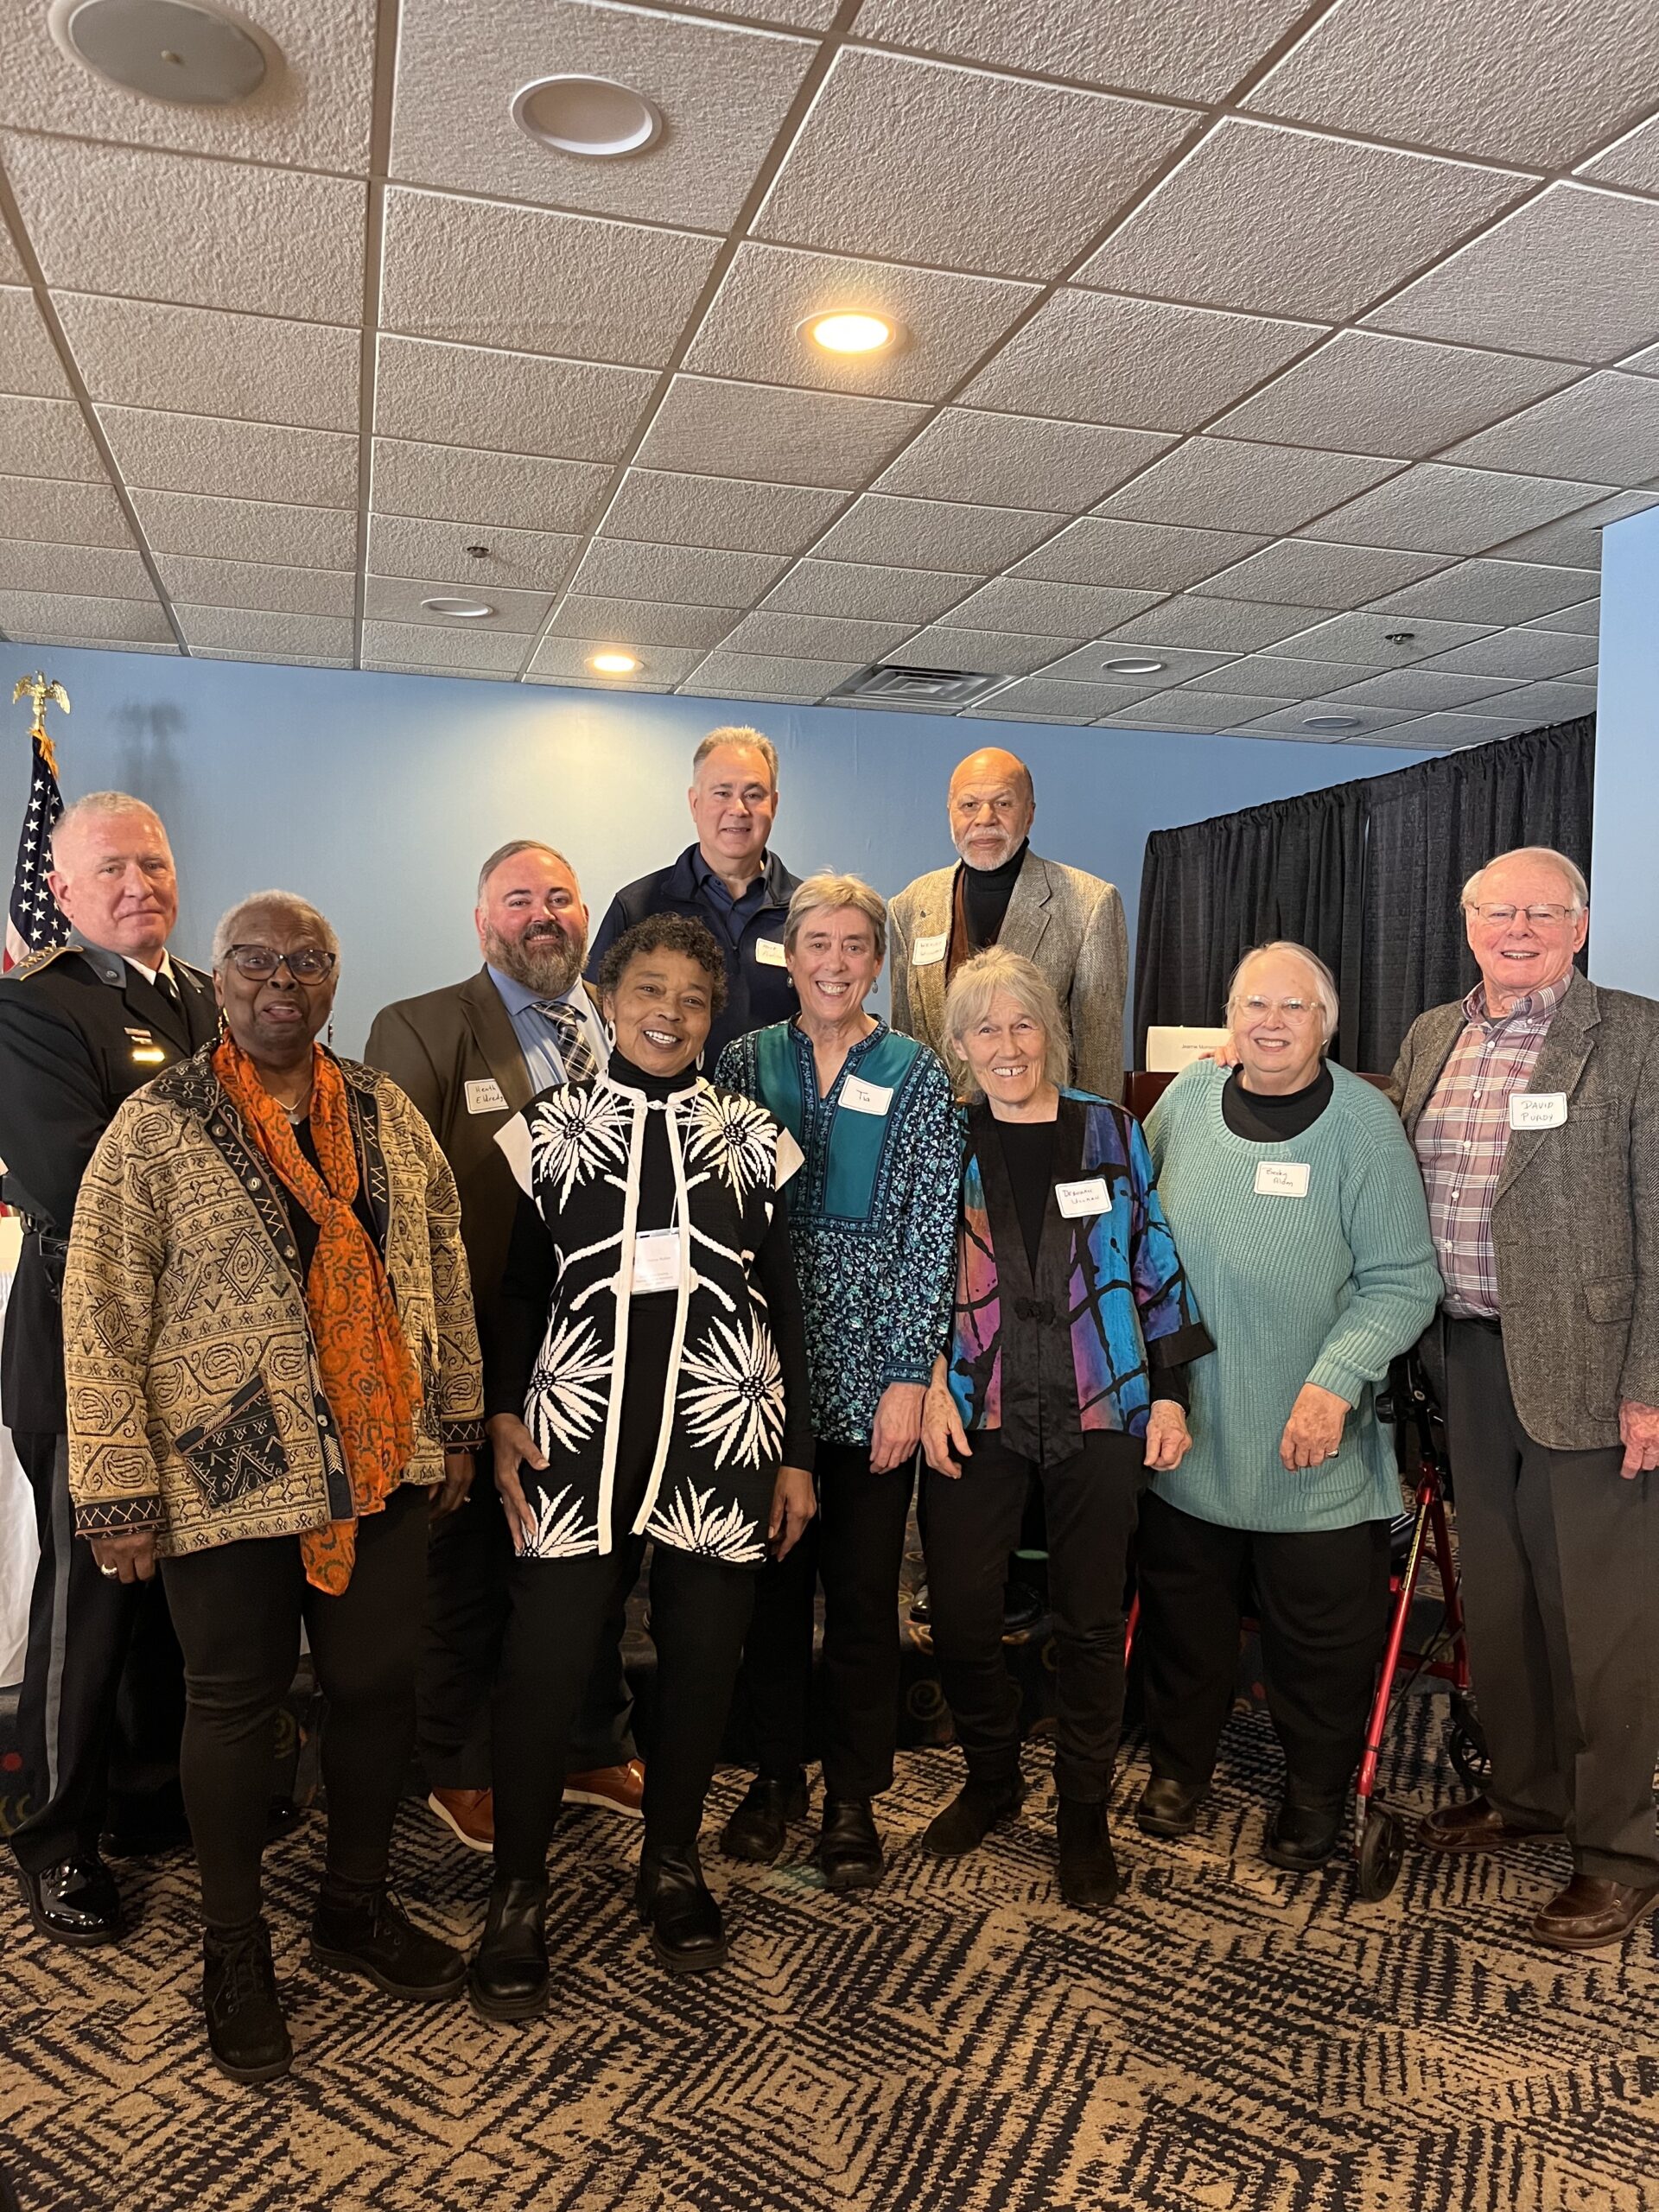 Barnstable Human Rights Commission’s Awards Breakfast